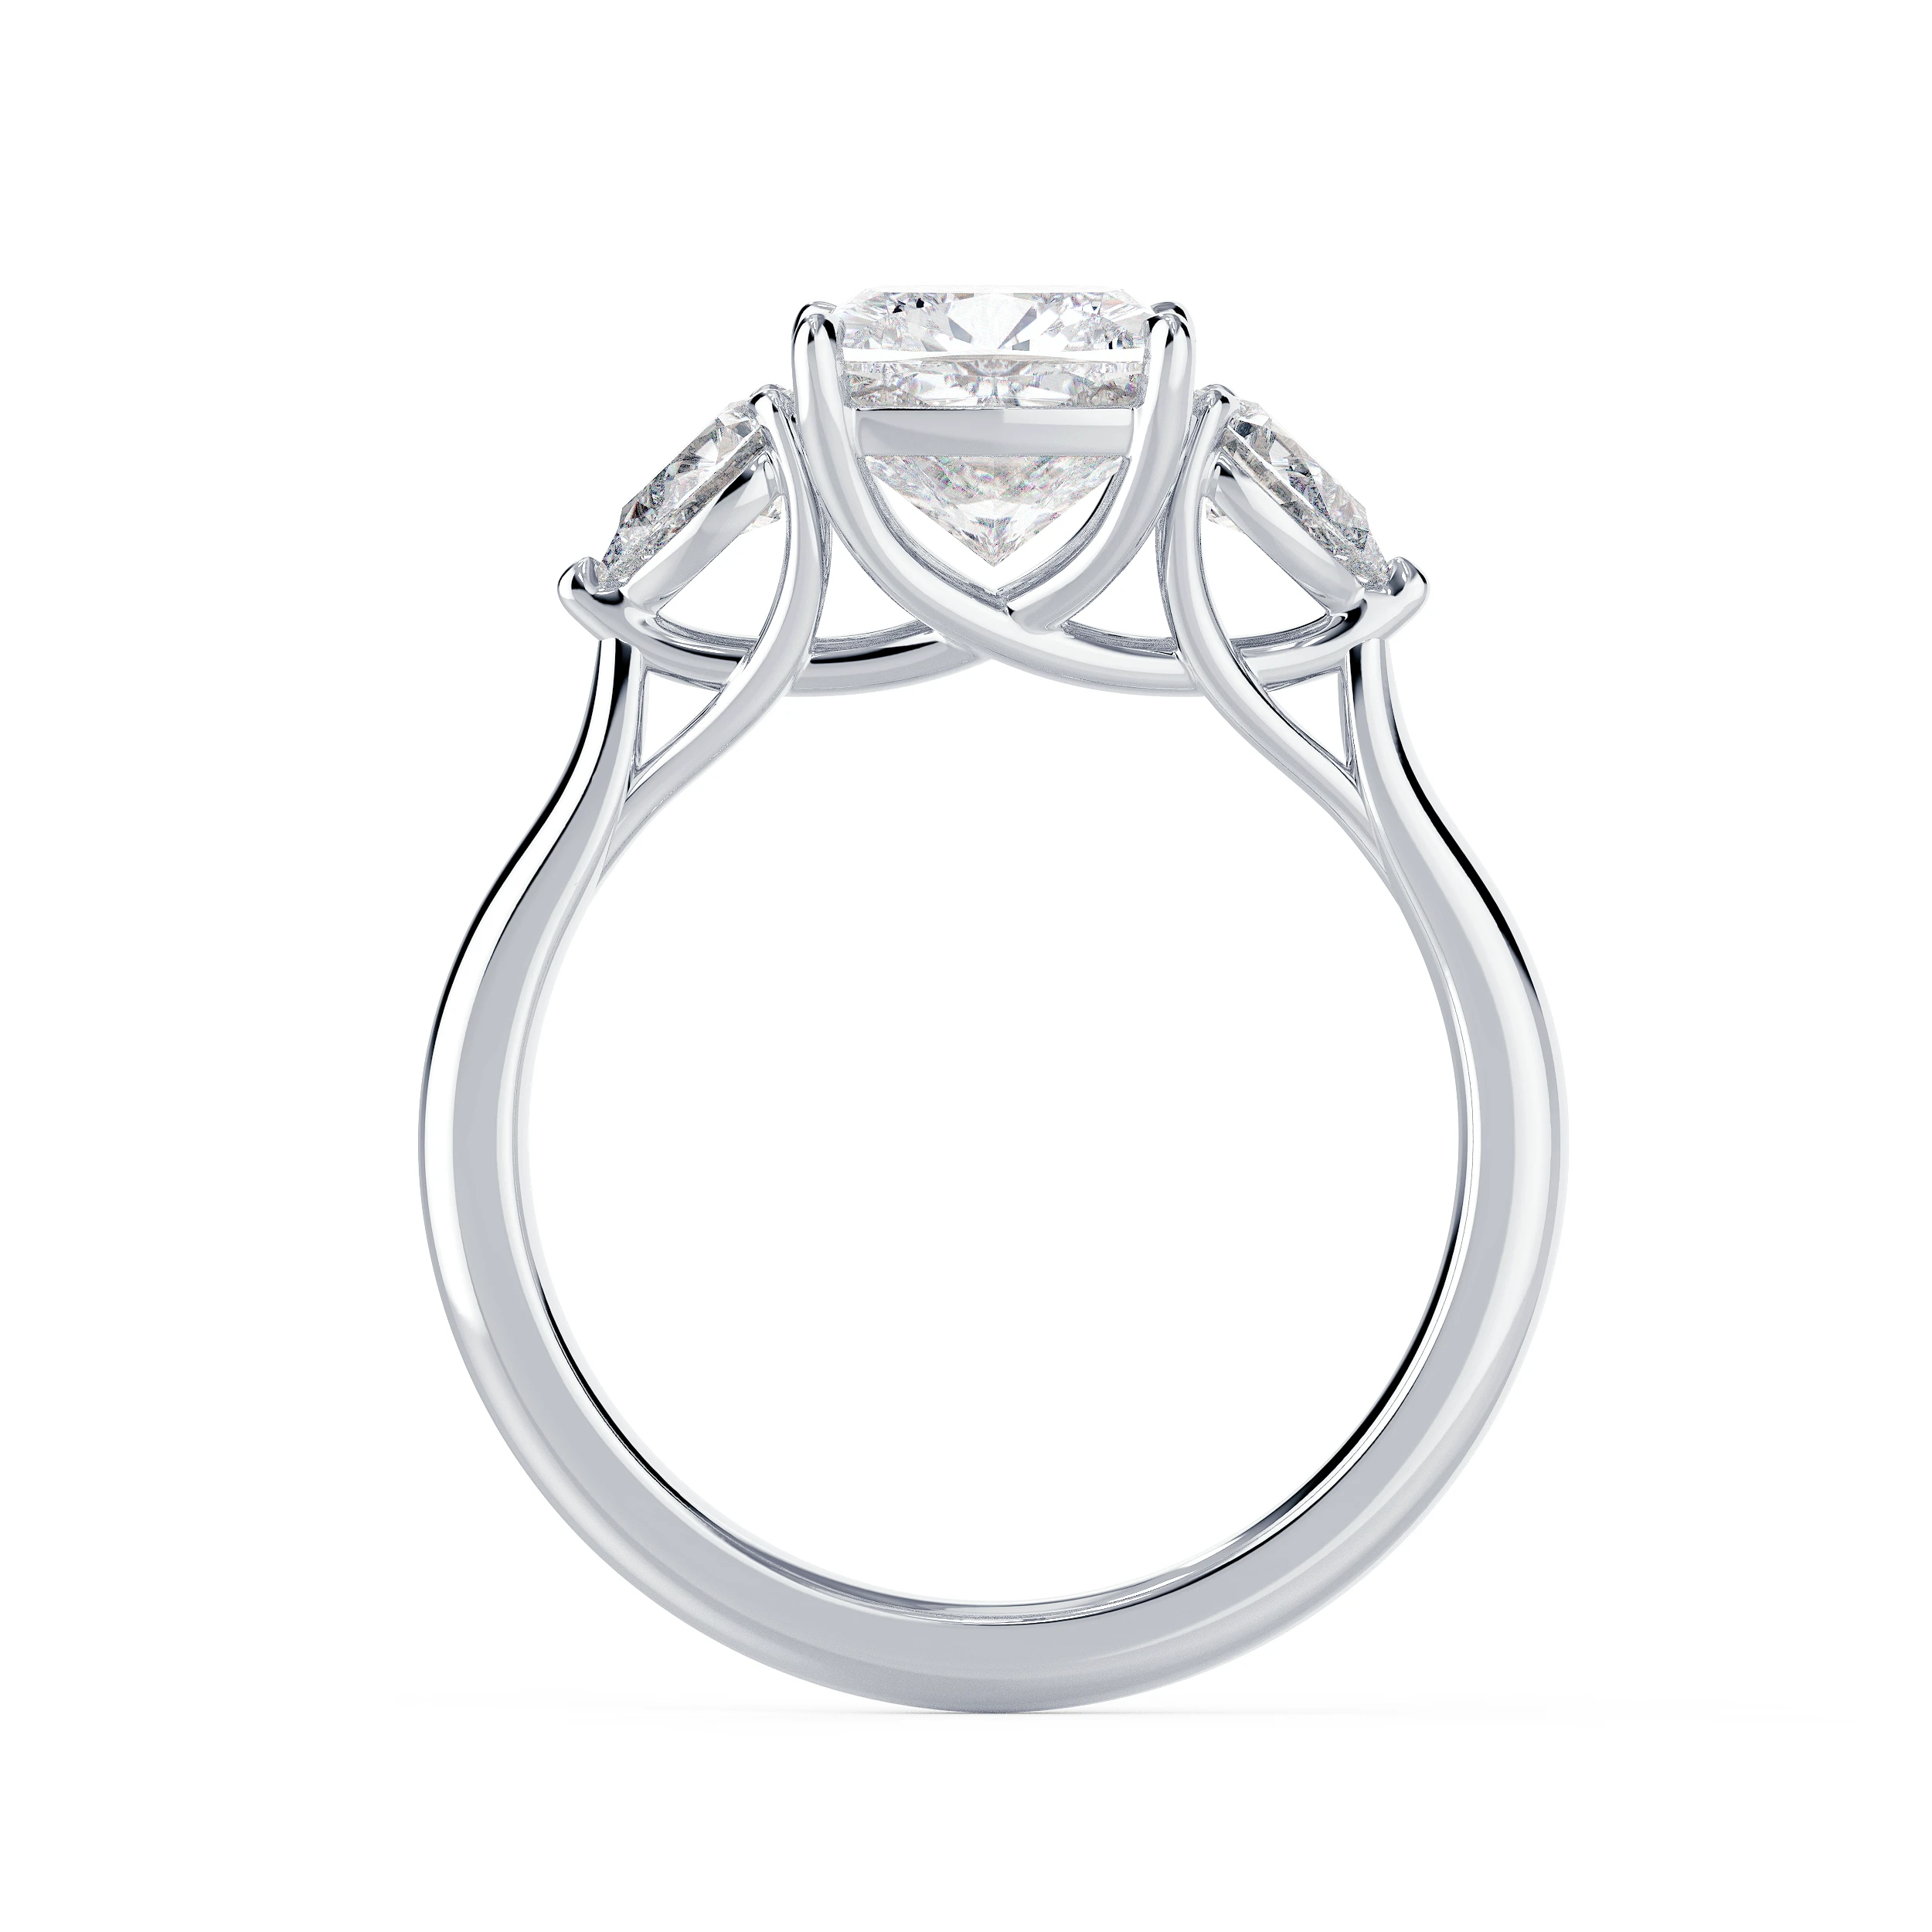 White Gold Cushion and Pear Diamond Engagement Ring featuring Diamonds (Profile View)